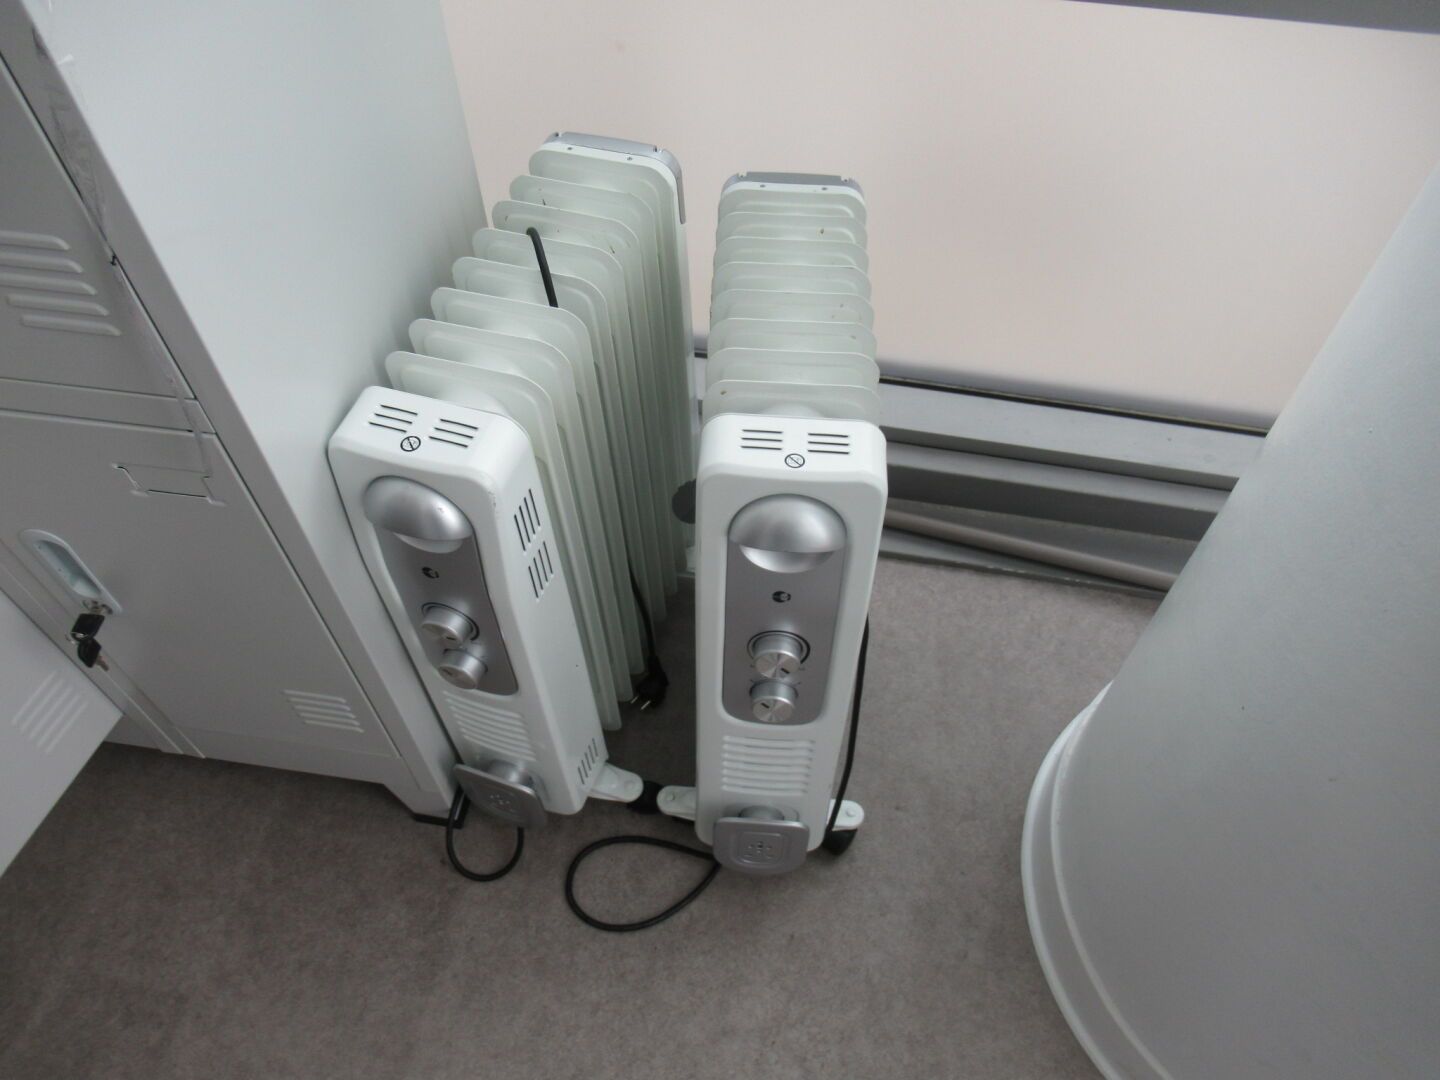 Null 3 oil-bath electric space heaters